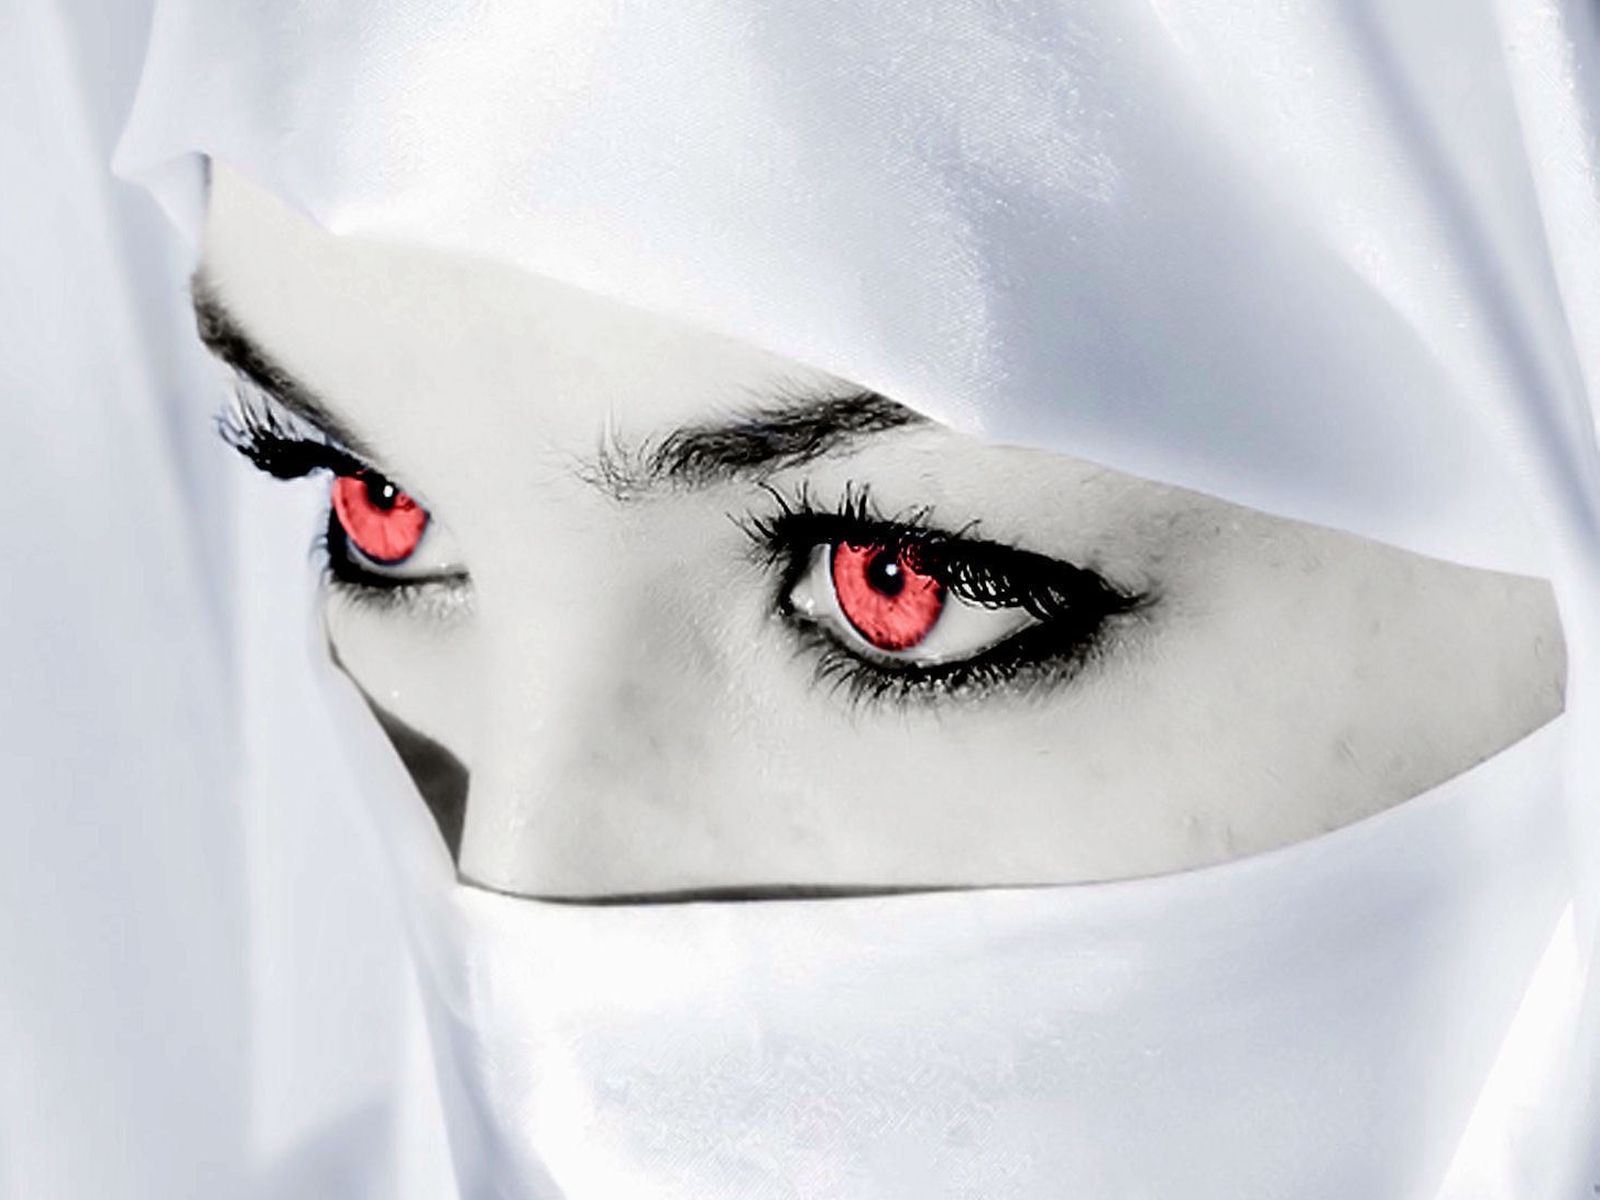 Download High quality red eyes veiled woman Eyes wallpaper / 1600x1200